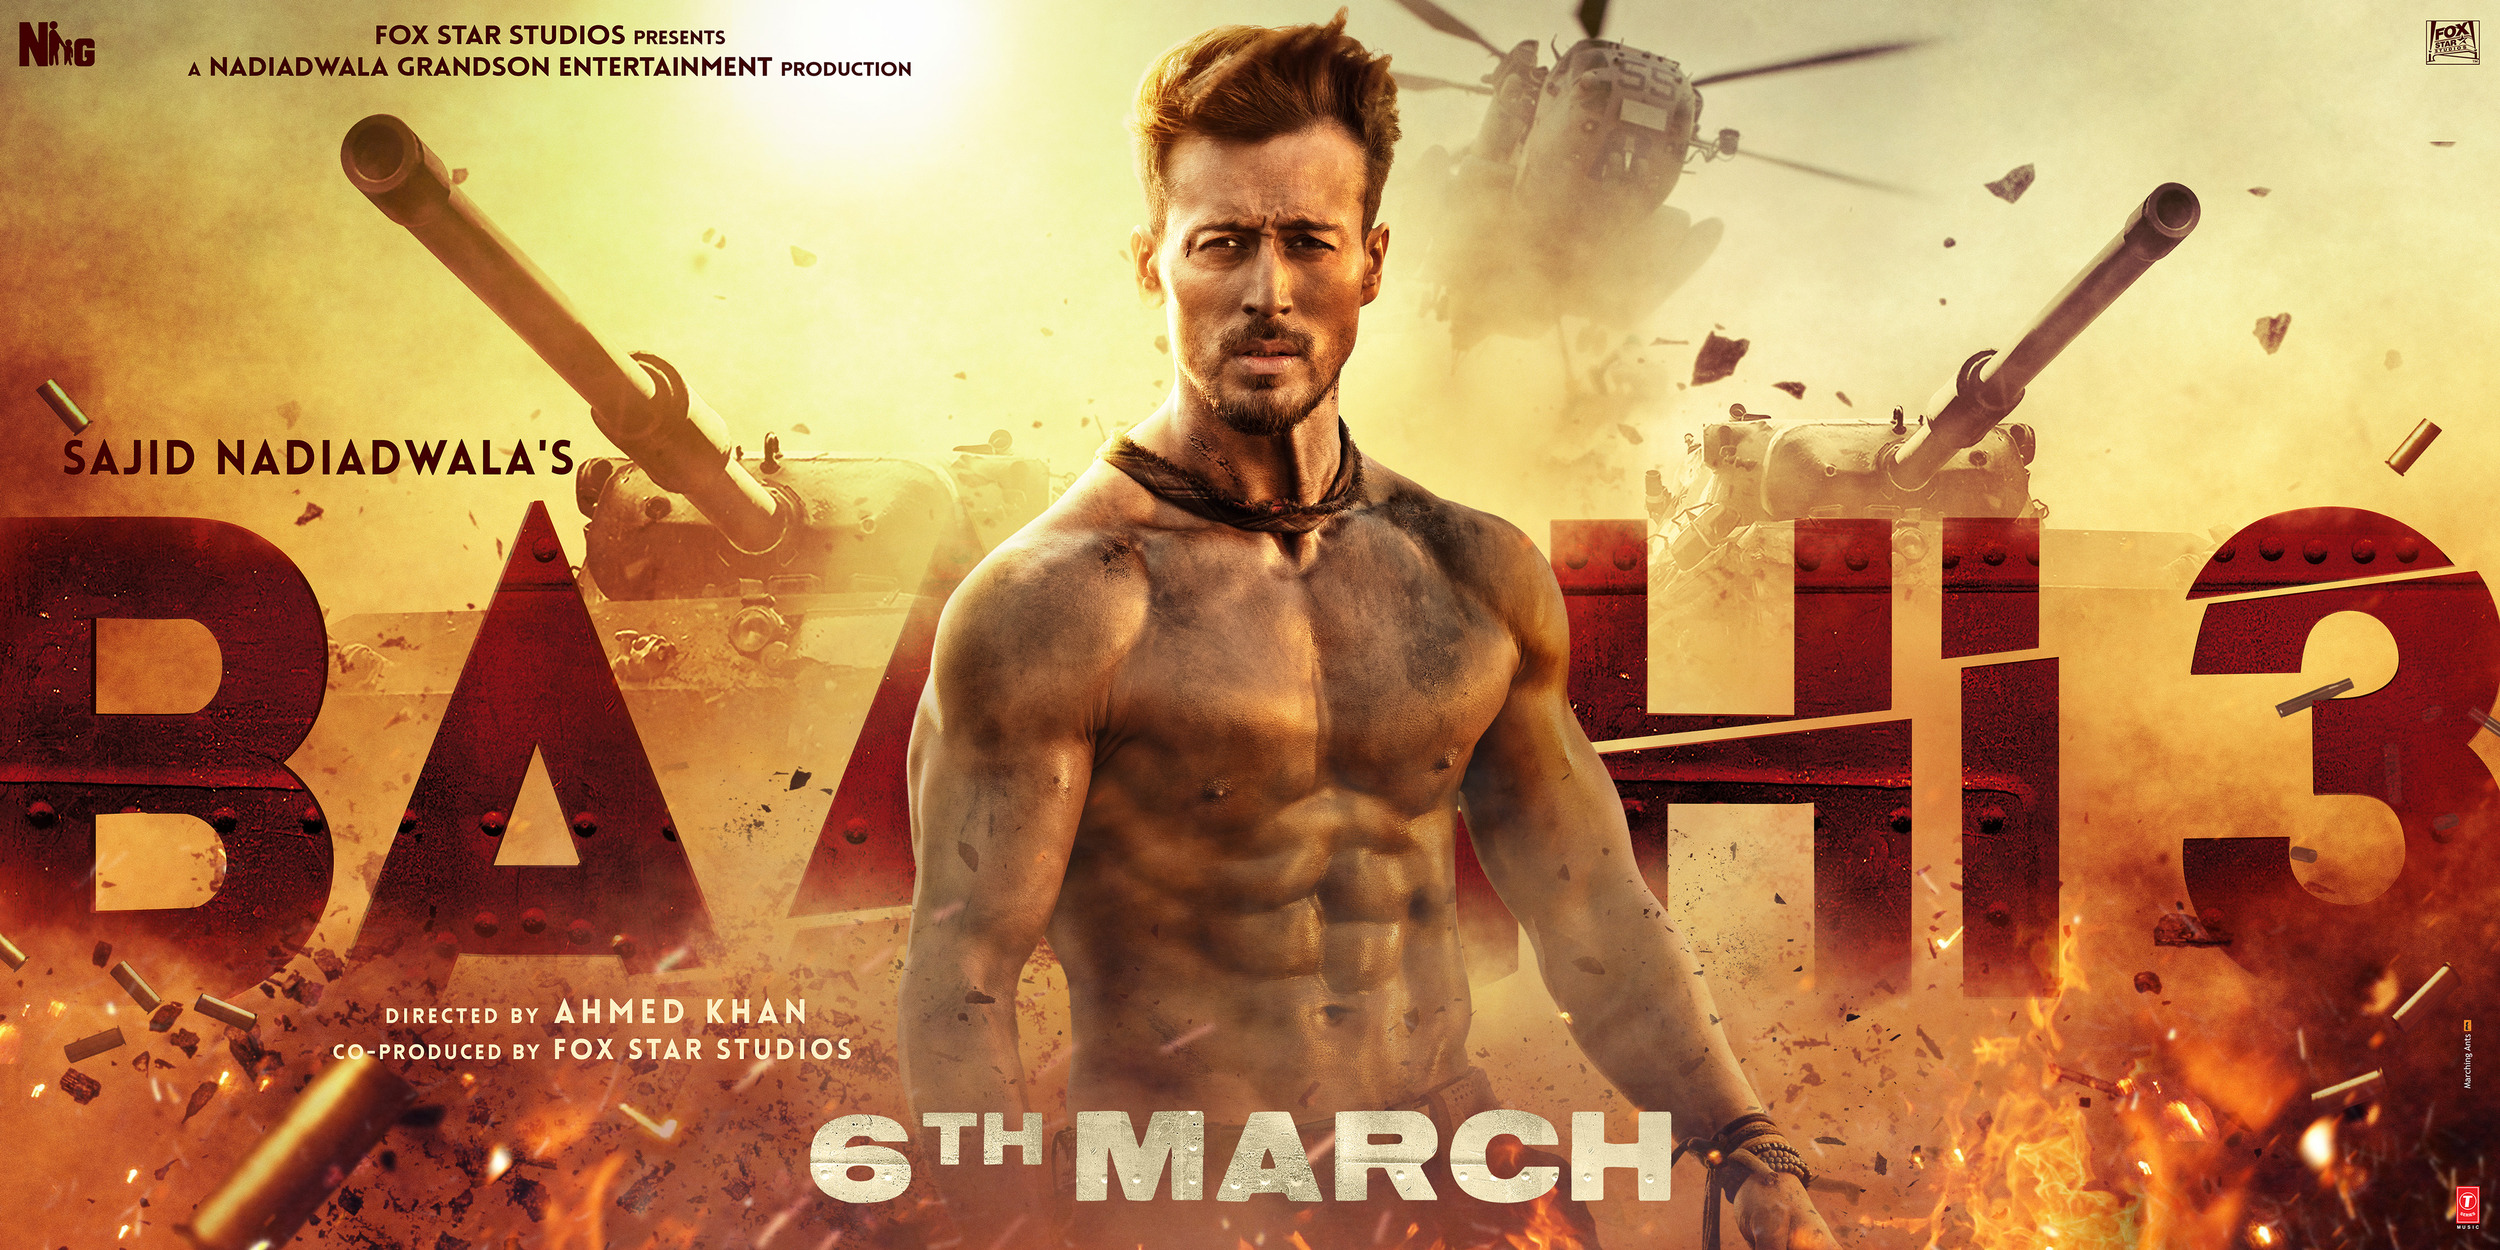 Mega Sized Movie Poster Image for Baaghi 3 (#6 of 6)